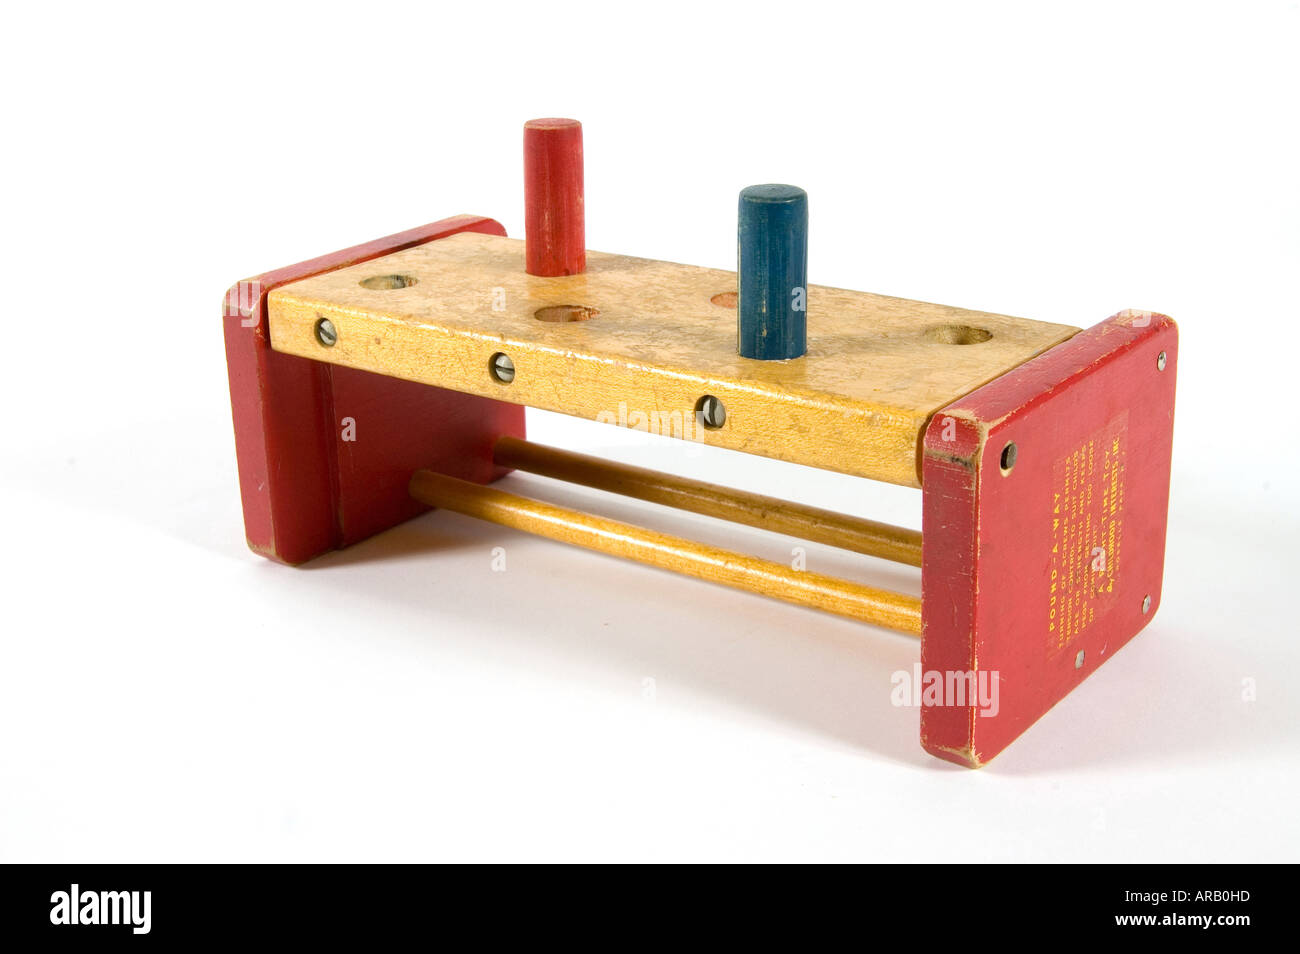 pound the pegs in the holes is the name of the game for this toy Stock Photo